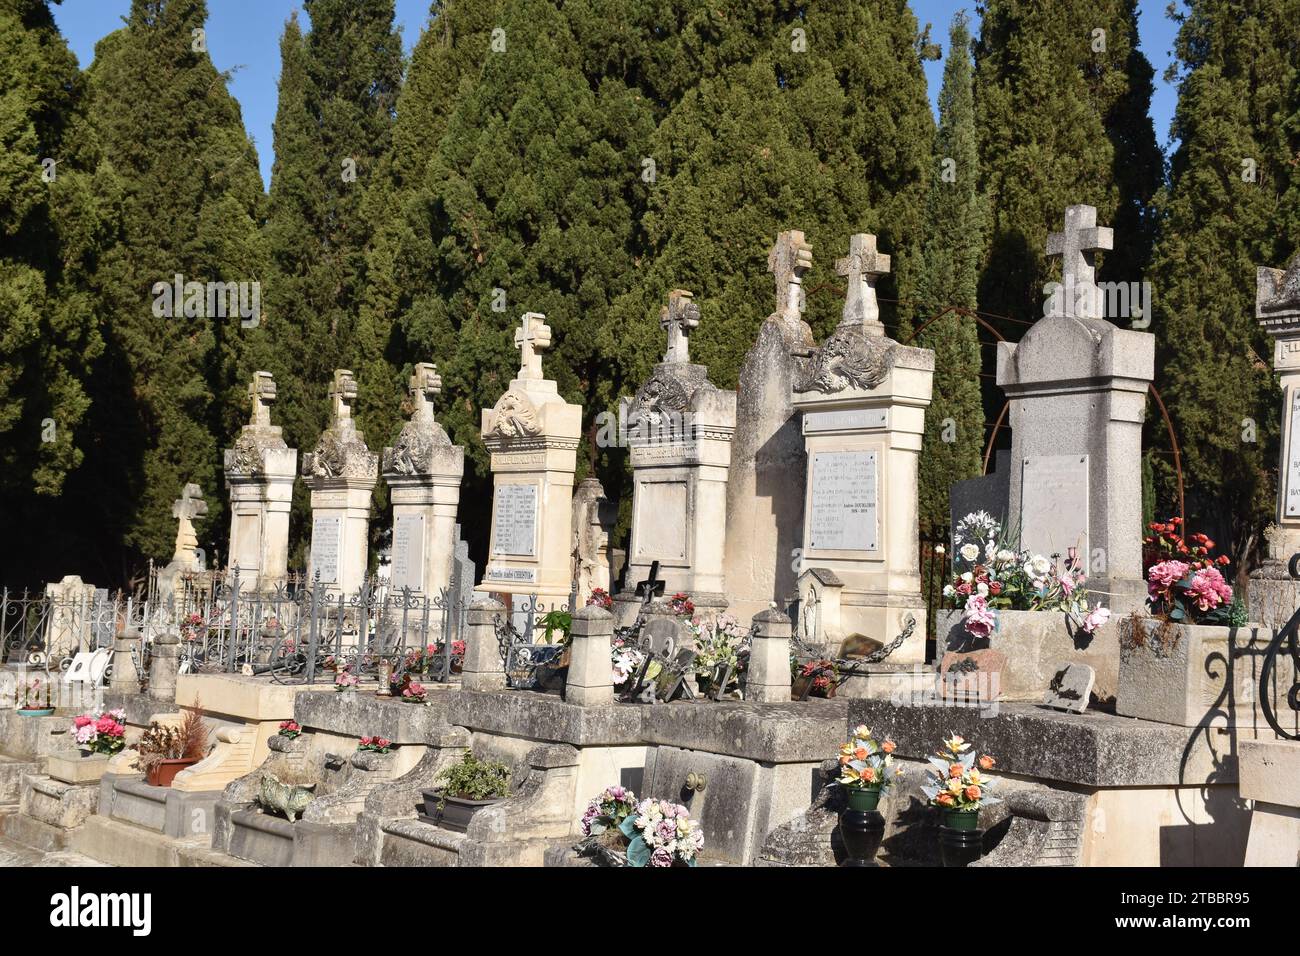 The wonderful Cimetière Vieux, the old cemetery in Béziers, France. Opened in 1812, prolific pines & cypress trees & many superb tombs & mausolea Stock Photo